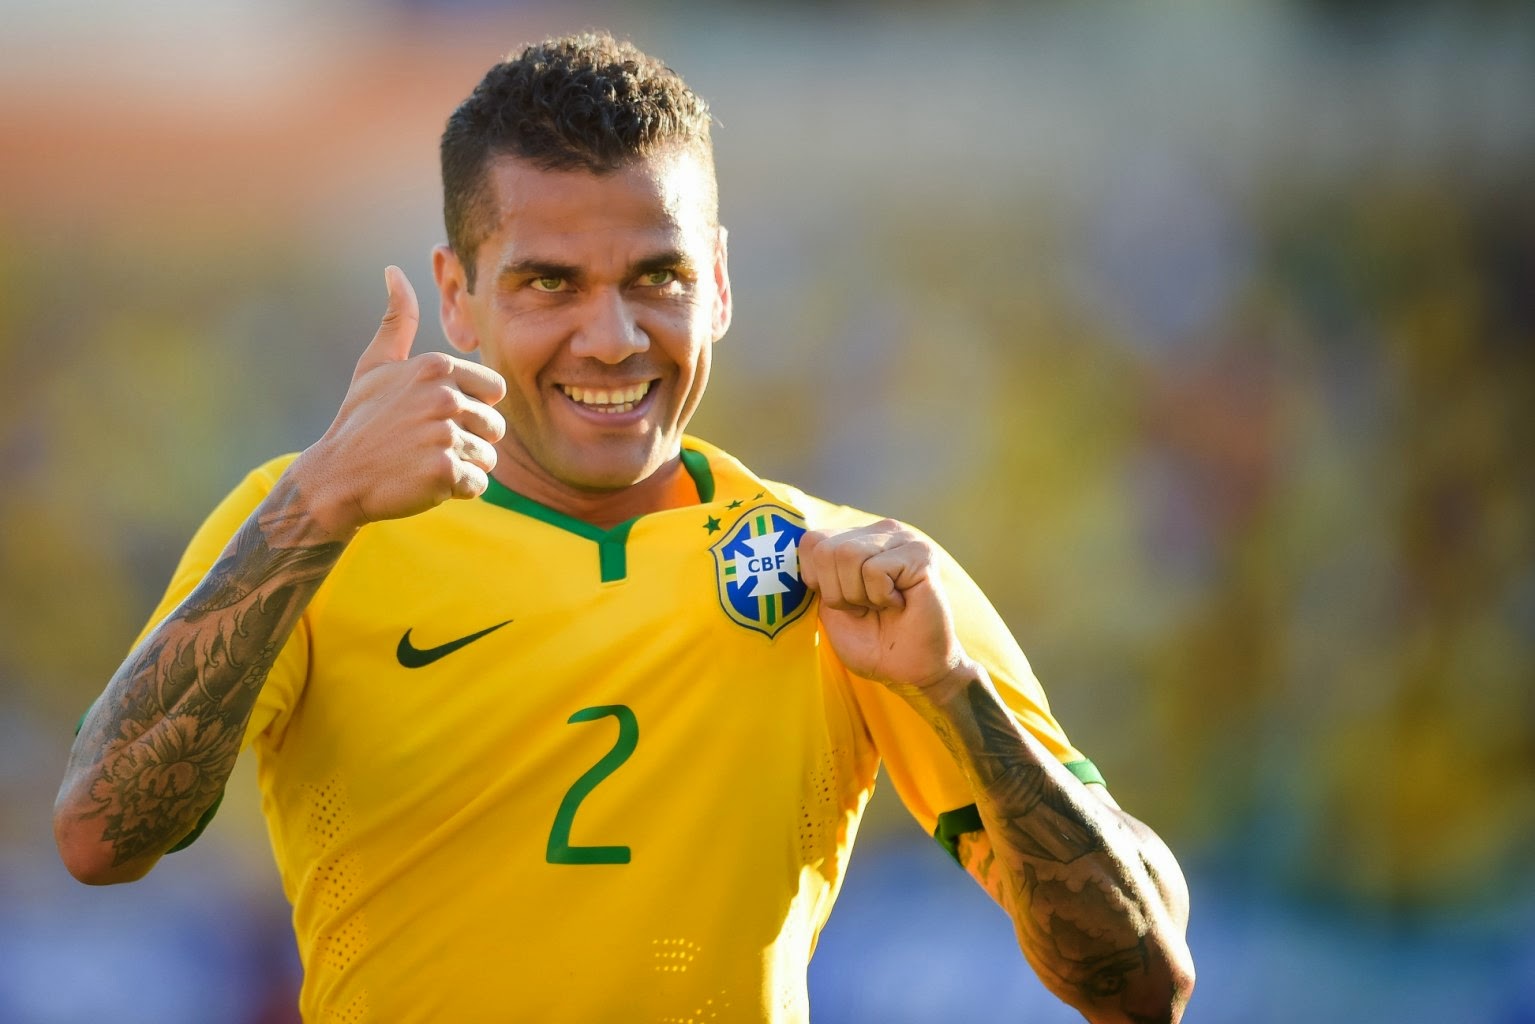 ALL SPORTS PLAYERS: Dani Alves hd Wallpapers 2014